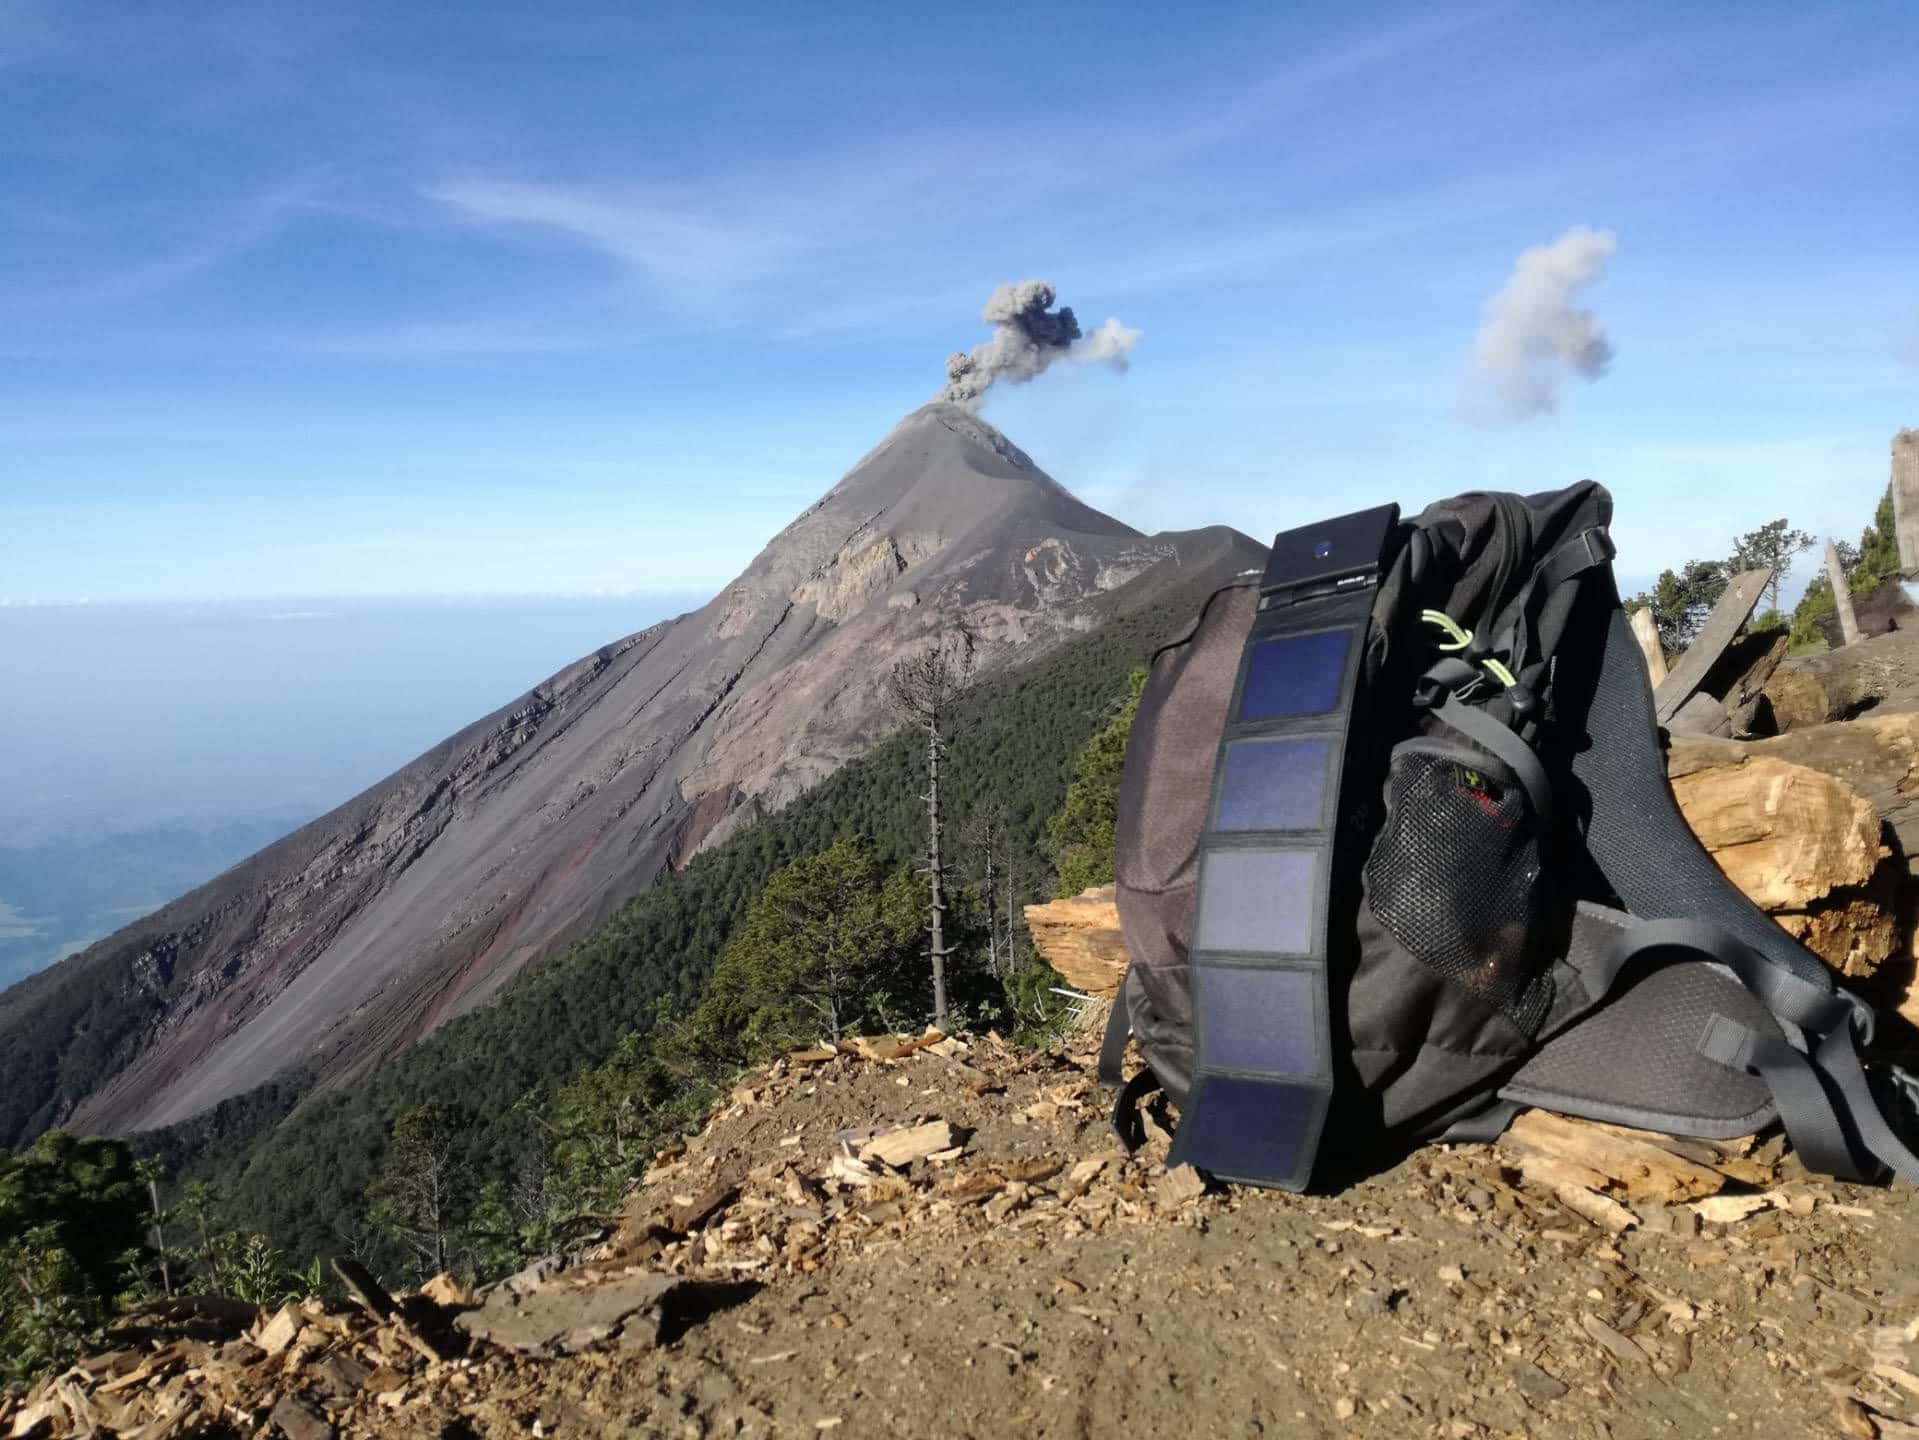 photo with background of a volcano mountain in Guatemala and a hiking bag with the best solar phone charger the Photon